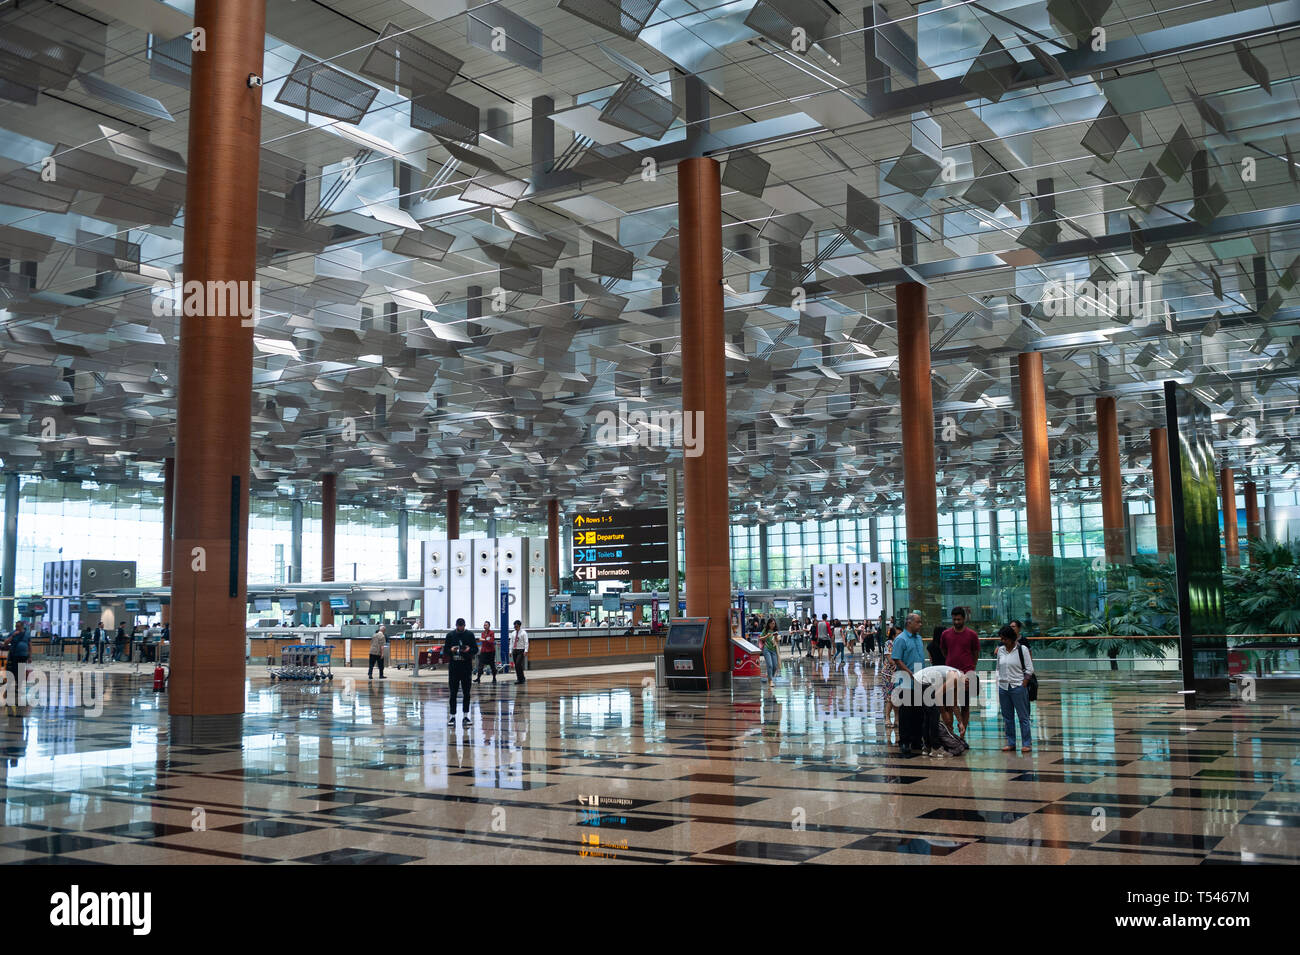 18.04.2019, Singapore, Republic of Singapore, Asia - A view of the departure hall inside Terminal 3 at Changi Airport. Stock Photo